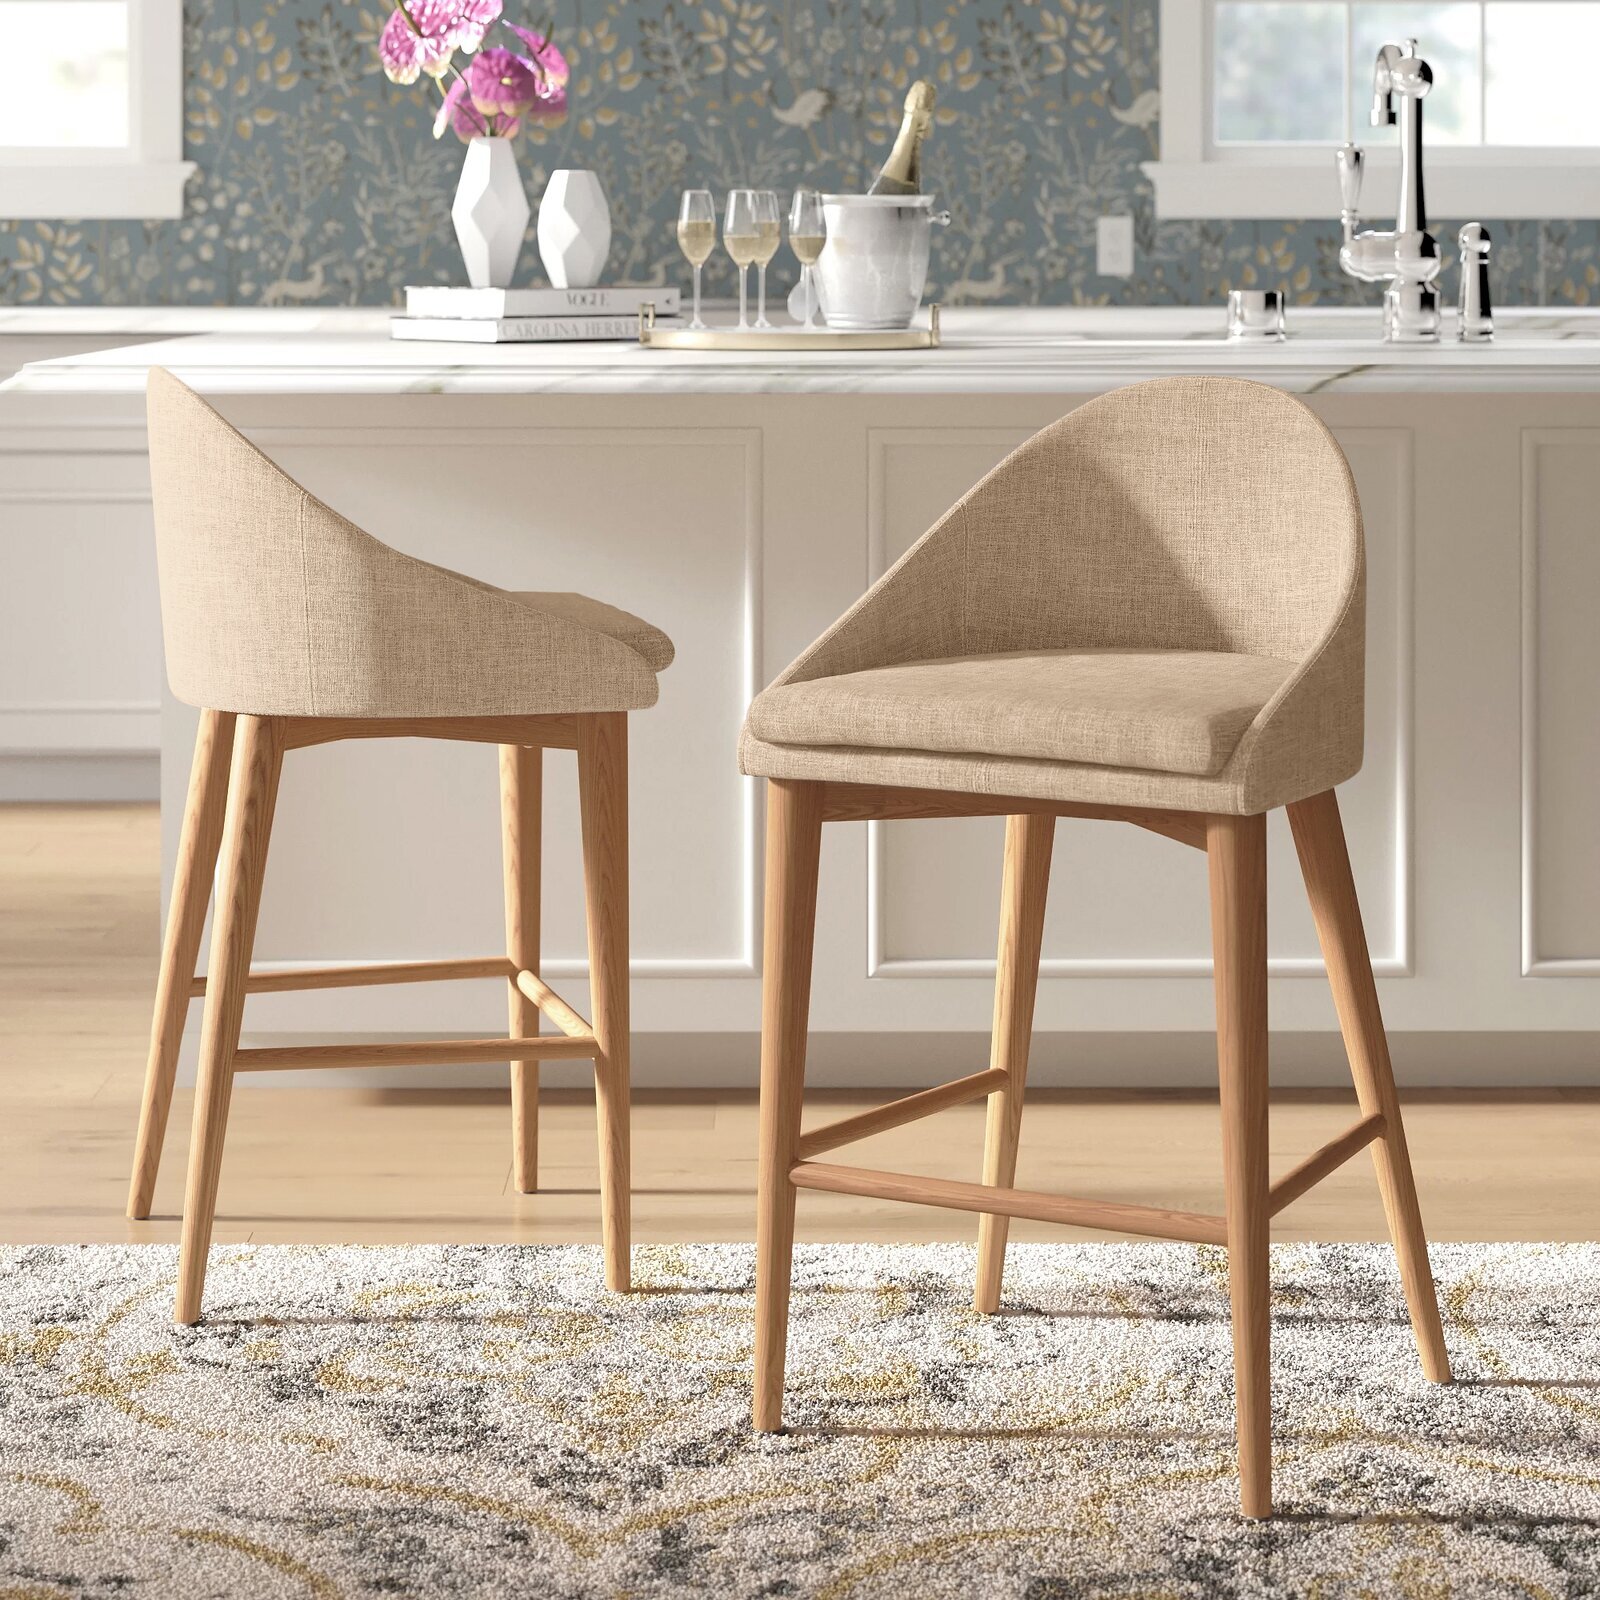 Upholstered Heavy Duty Counter Stools